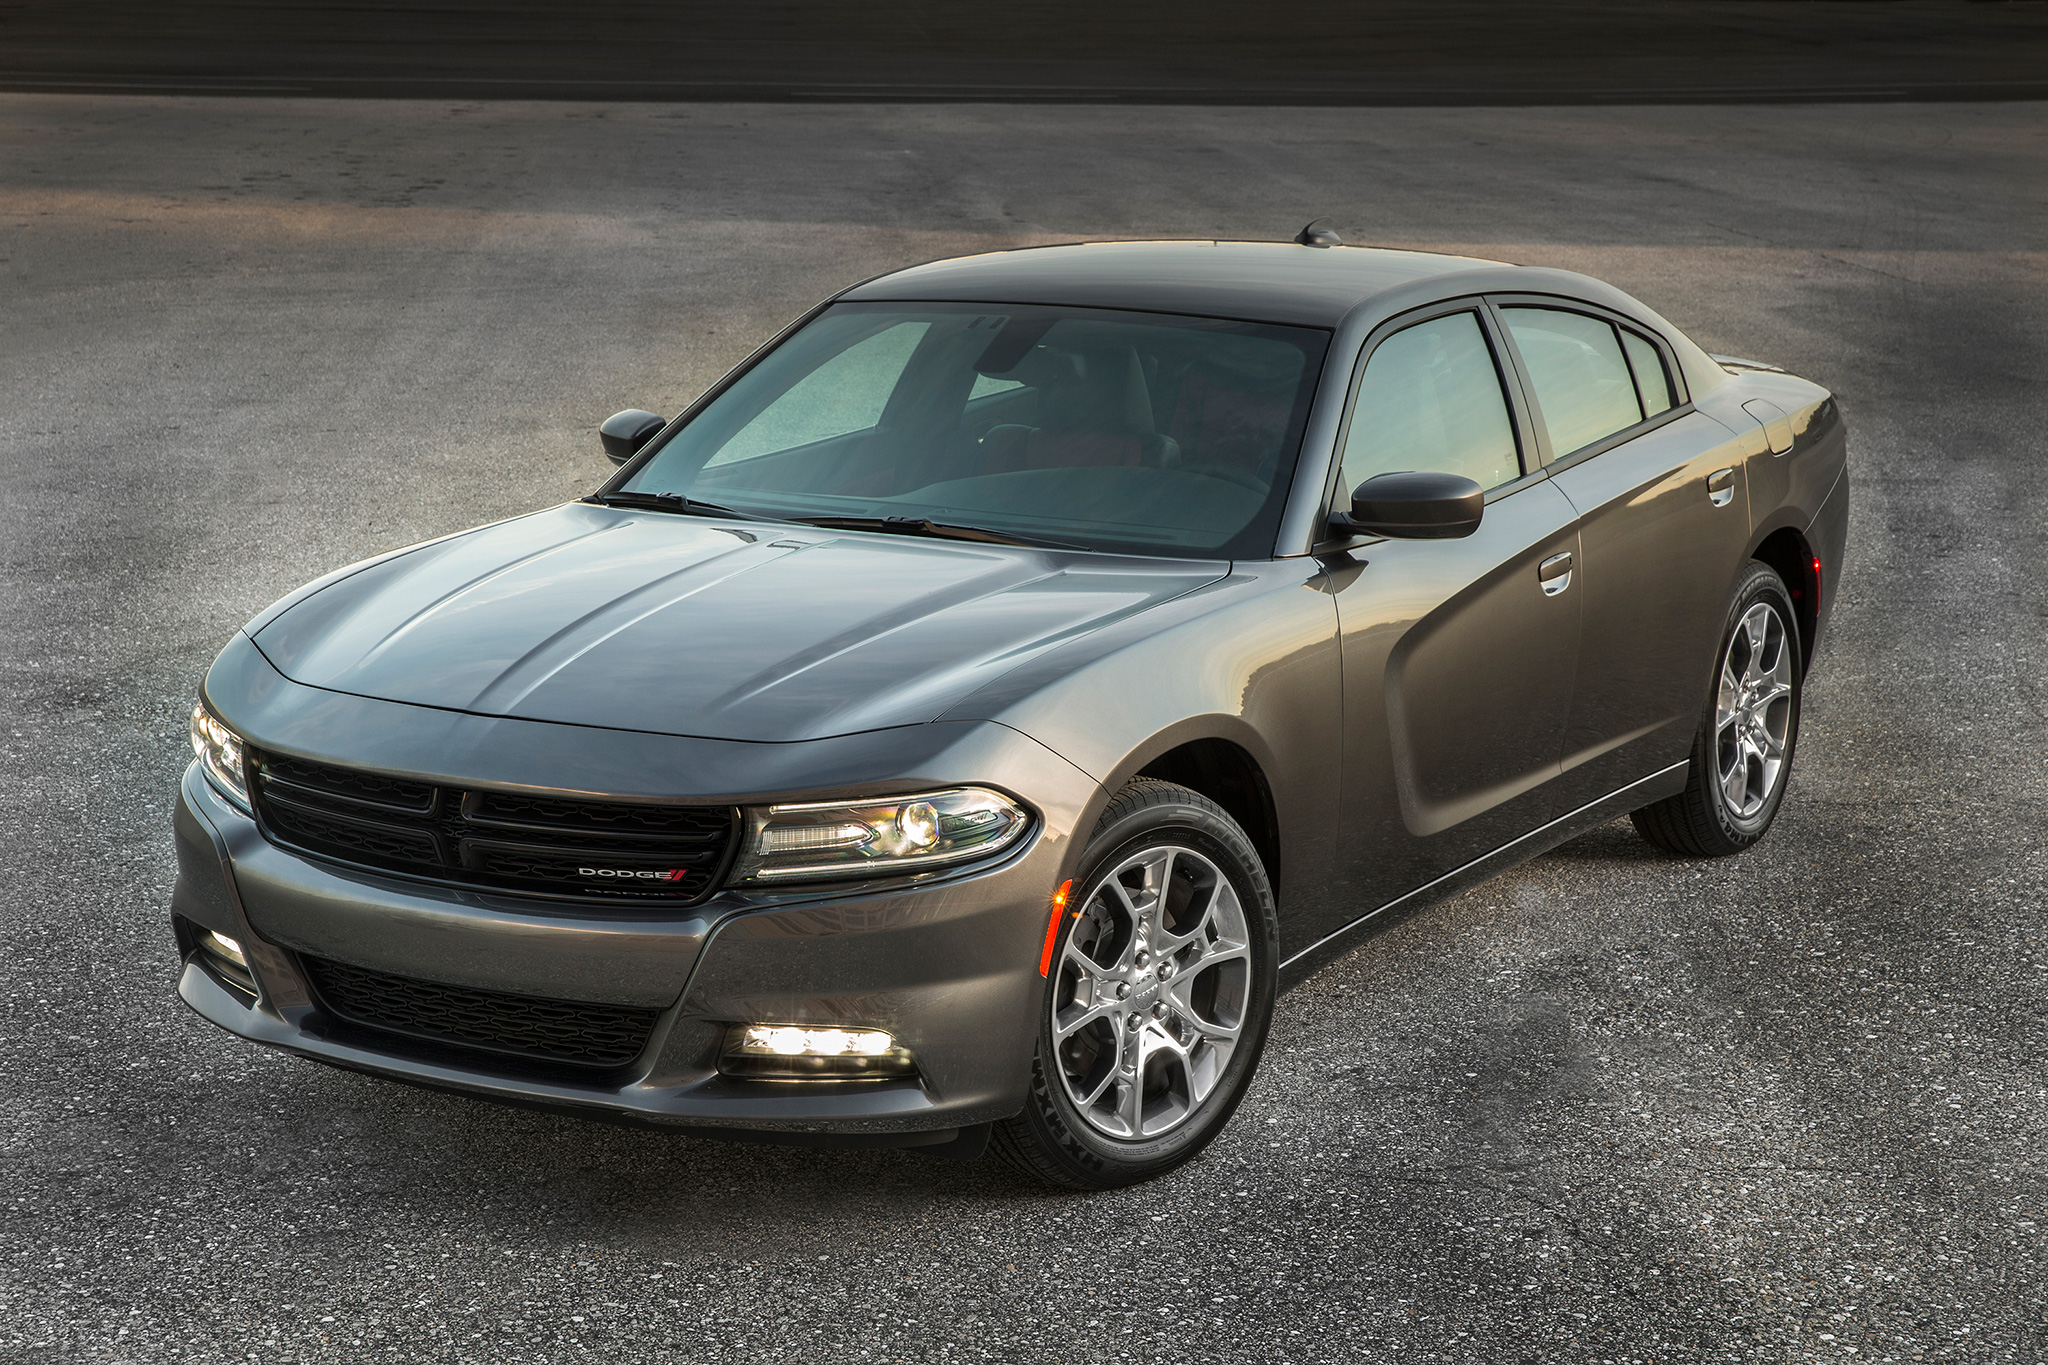 Amazing Dodge Charger Pictures & Backgrounds